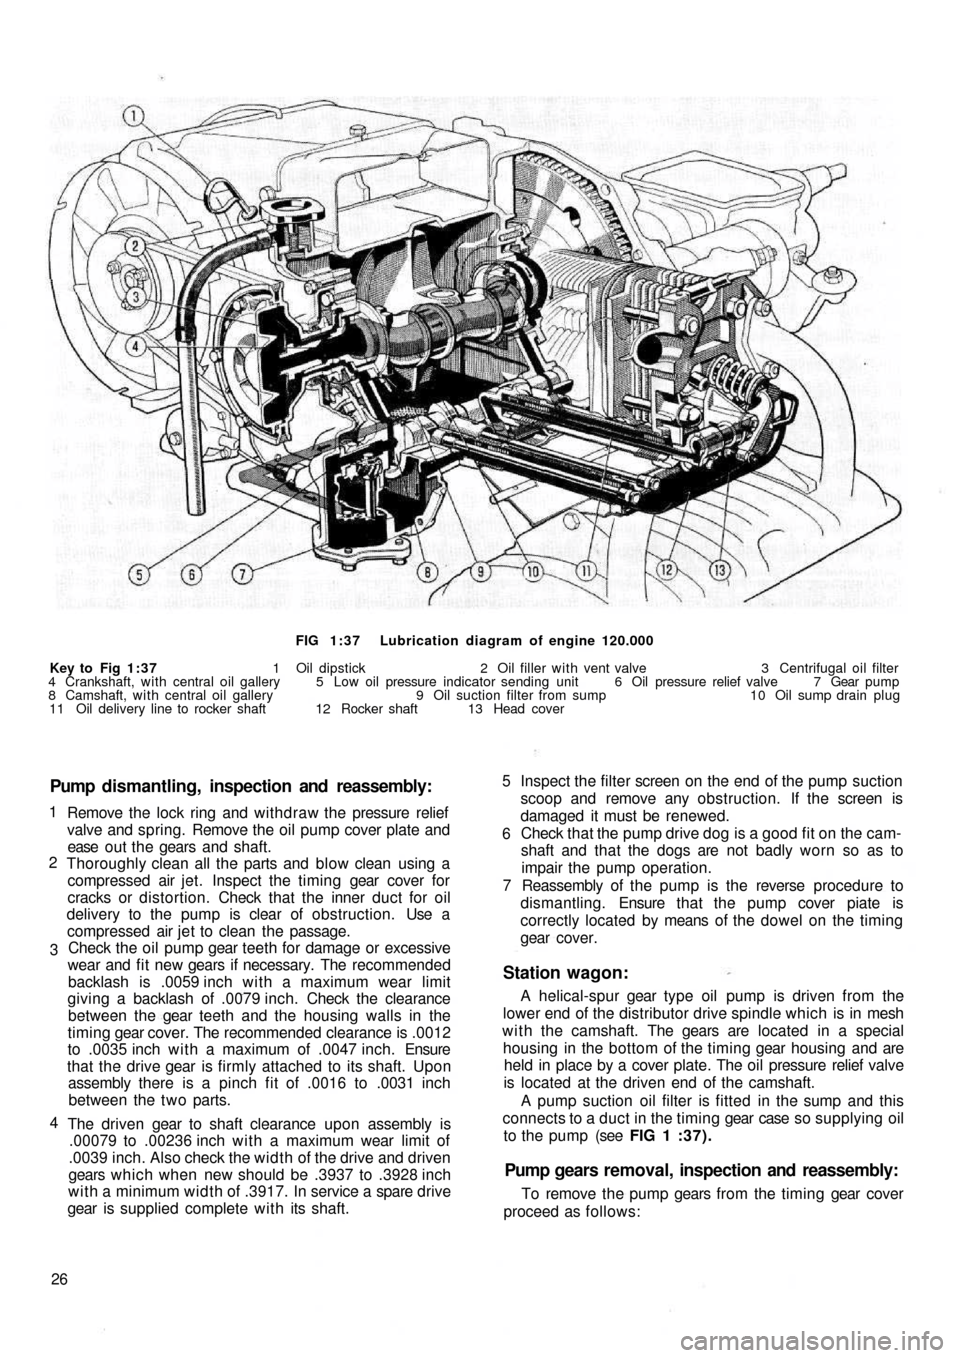 FIAT 500 1969 1.G User Guide FIG 1:37  Lubrication diagram of engine 120.000
Key to  Fig  1:37 1 Oil dipstick 2 Oil filler with vent valve  3 Centrifugal oil filter
4 Crankshaft, with central oil gallery  5  Low oil pressure indi